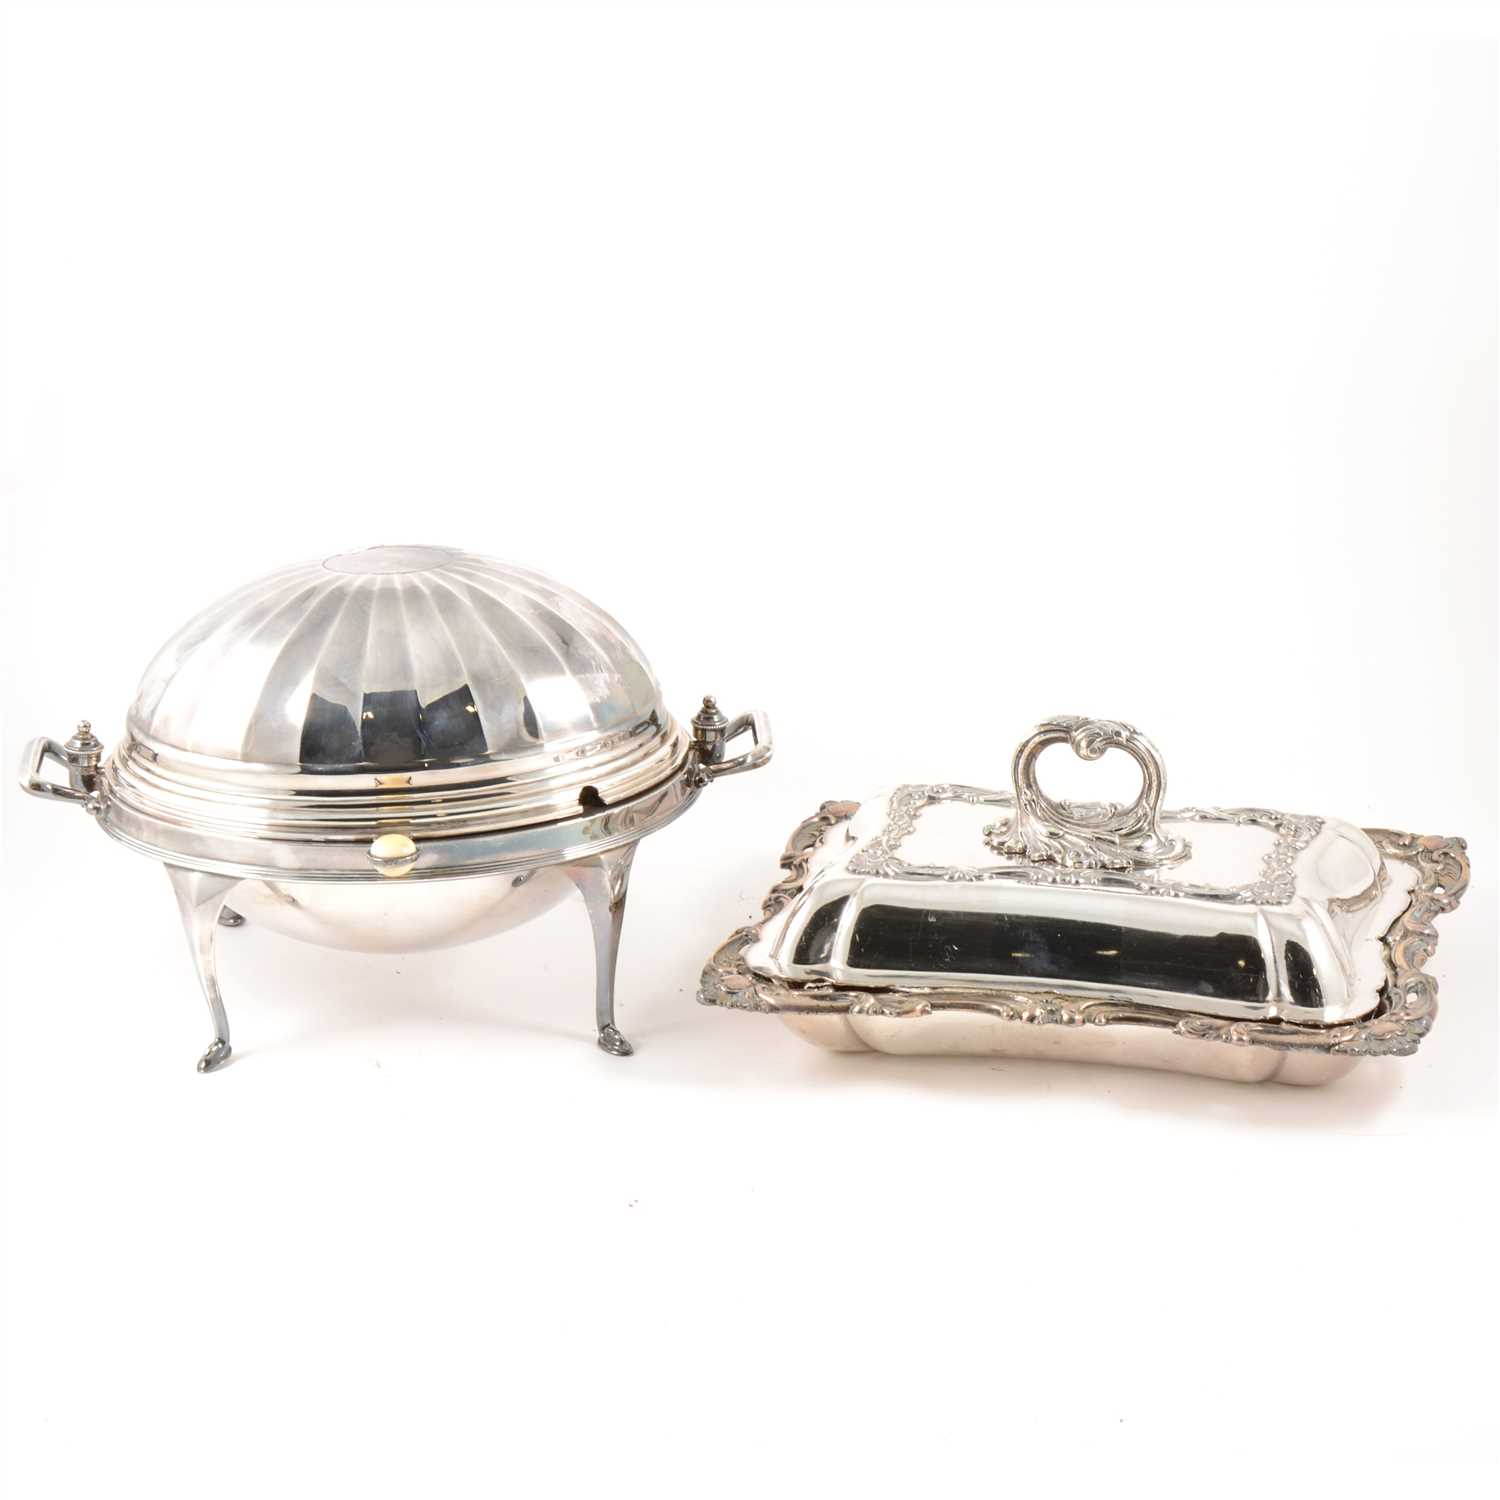 Lot 89 - An Edwardian electroplated revolving breakfast dish, and pair of entree dishes.